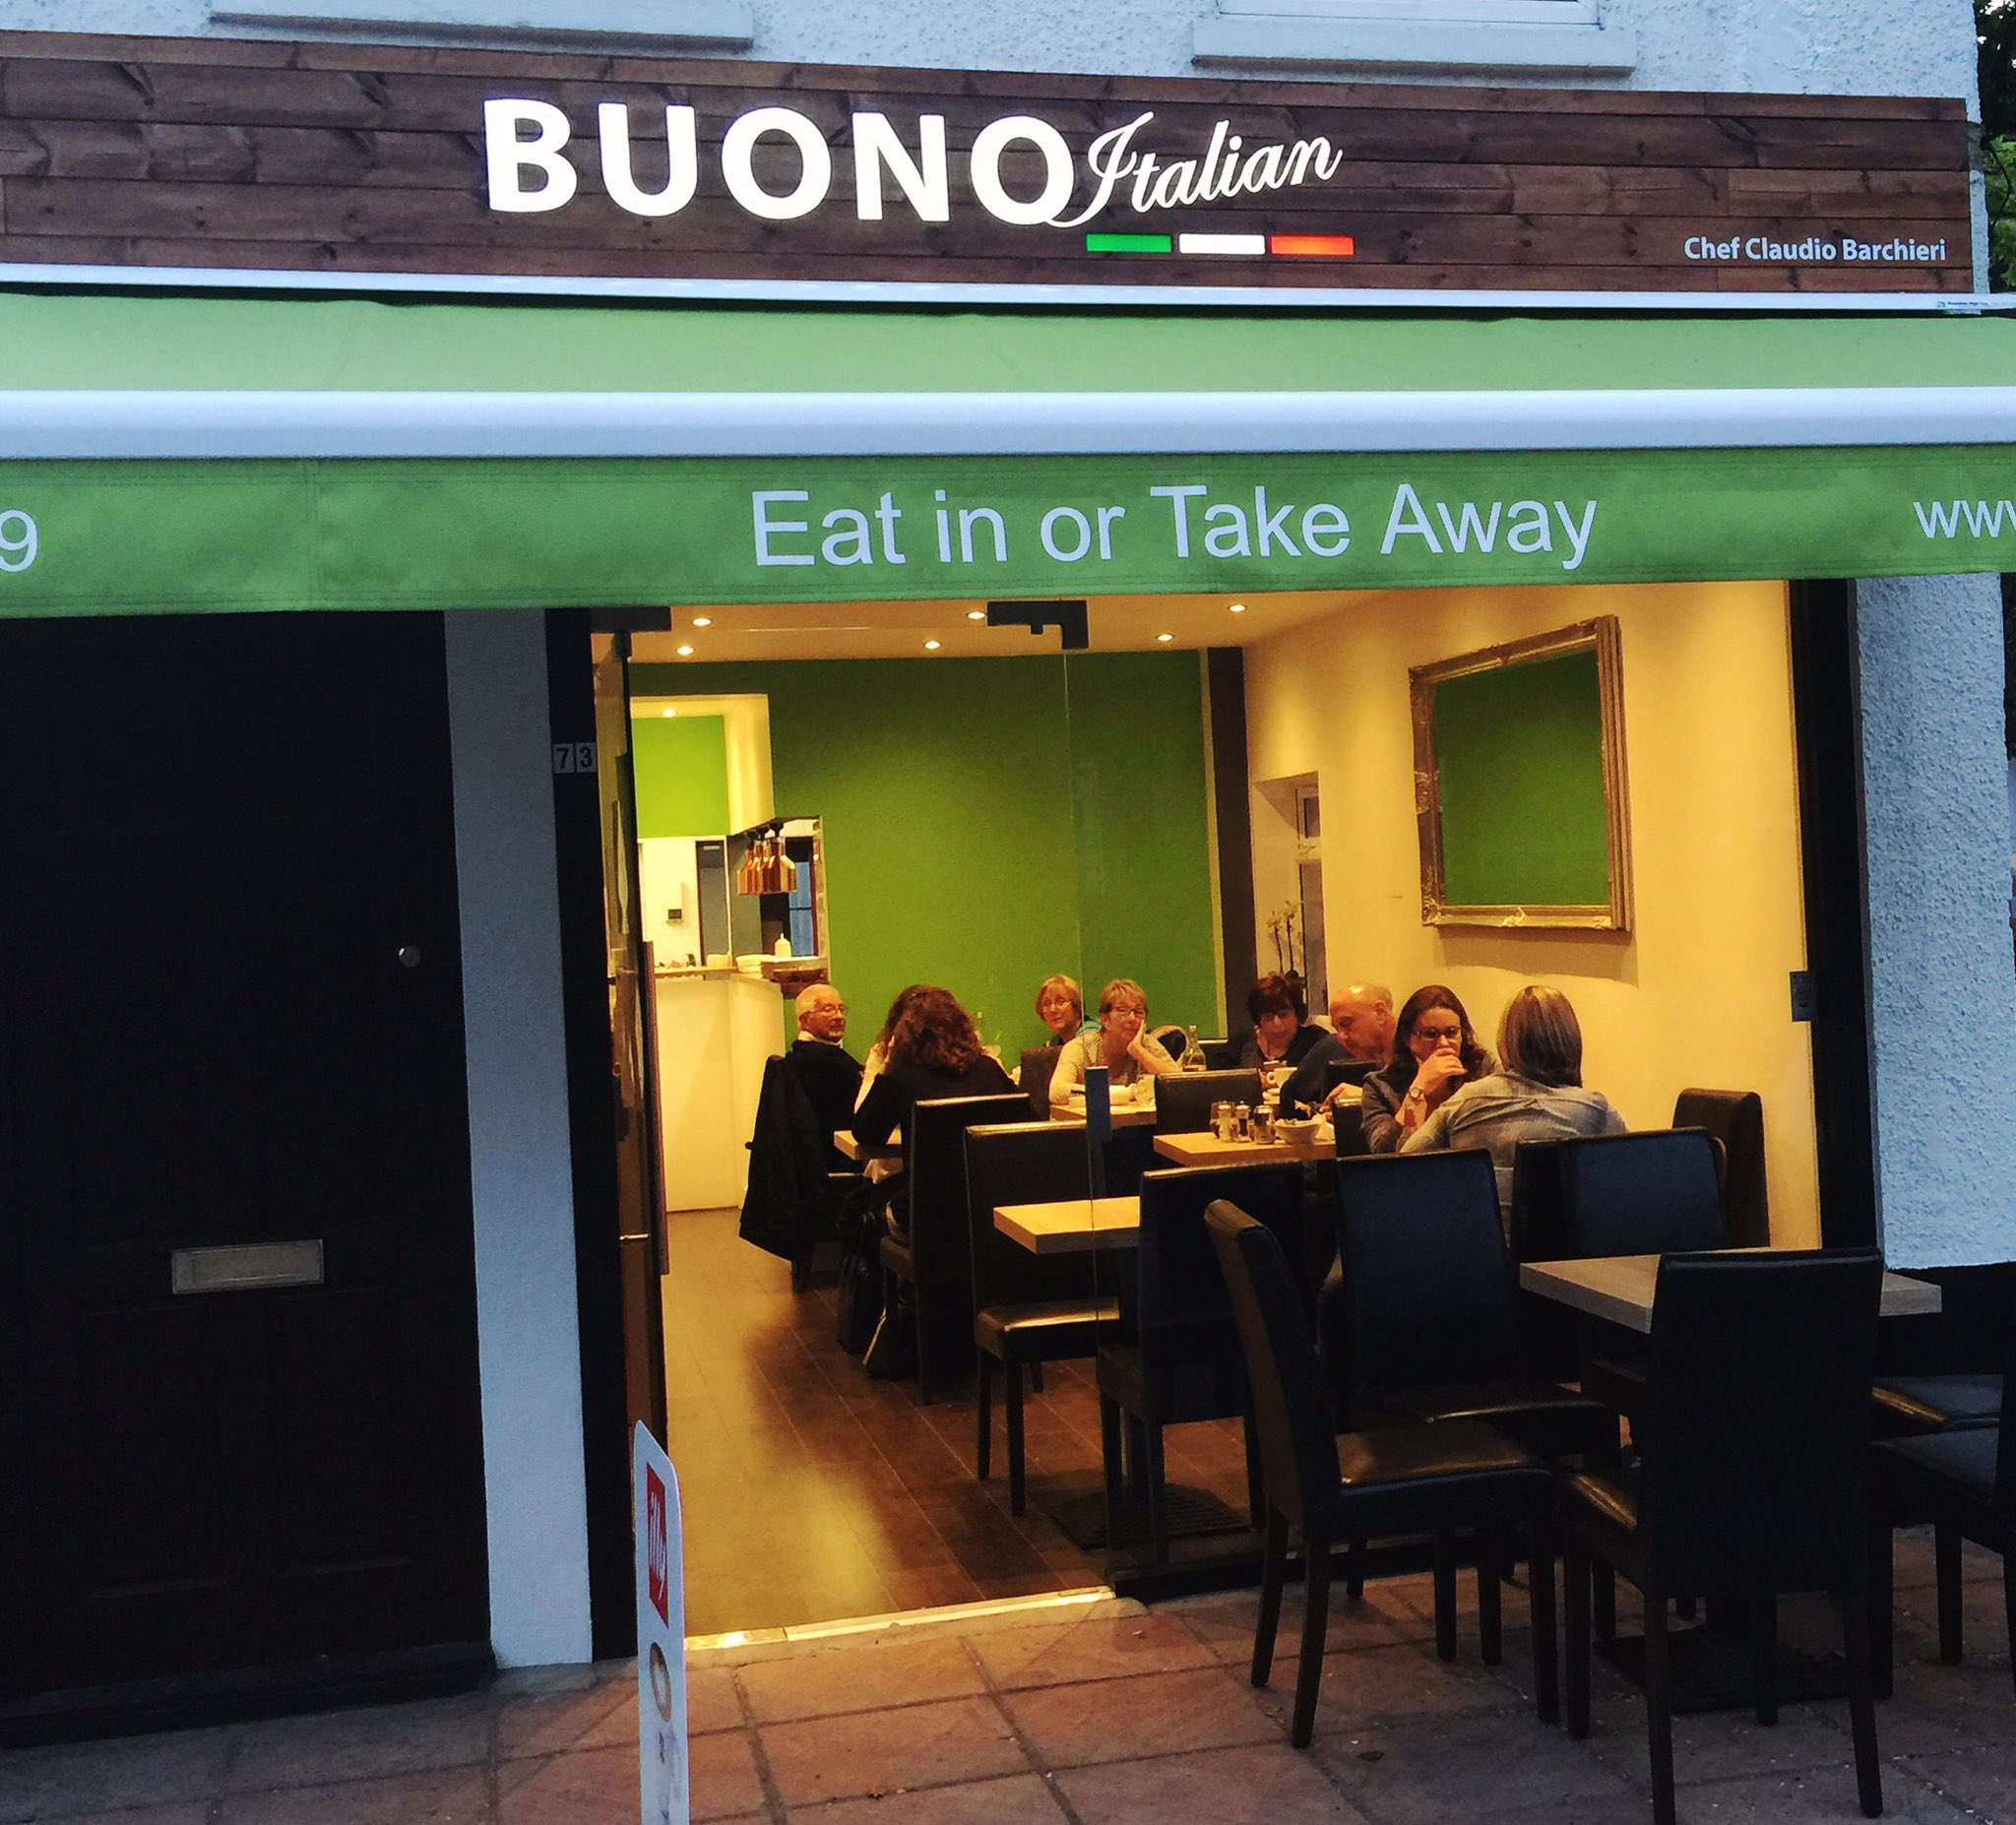 Buono Italian Great To See Our Customers Eating In Our Cafe Proud Goodfood Buonoitalianltd Busheyheath T Co 6ueyjyveyf Twitter